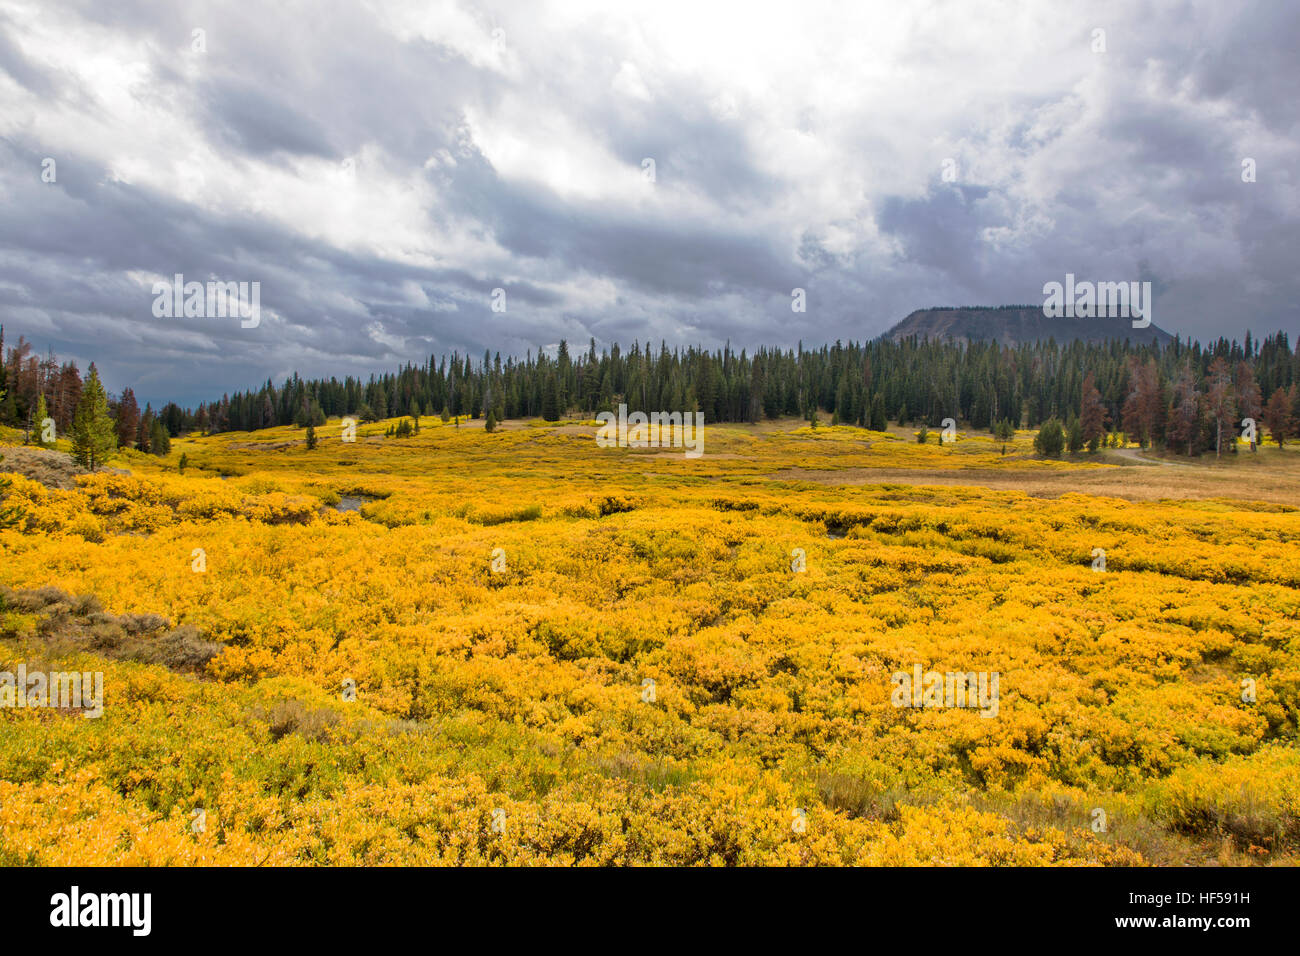 Ground cover turns golden in the autumn, view from Rt. 287 towards the Bridger - Teton National Forest, Wyoming, USA Stock Photo